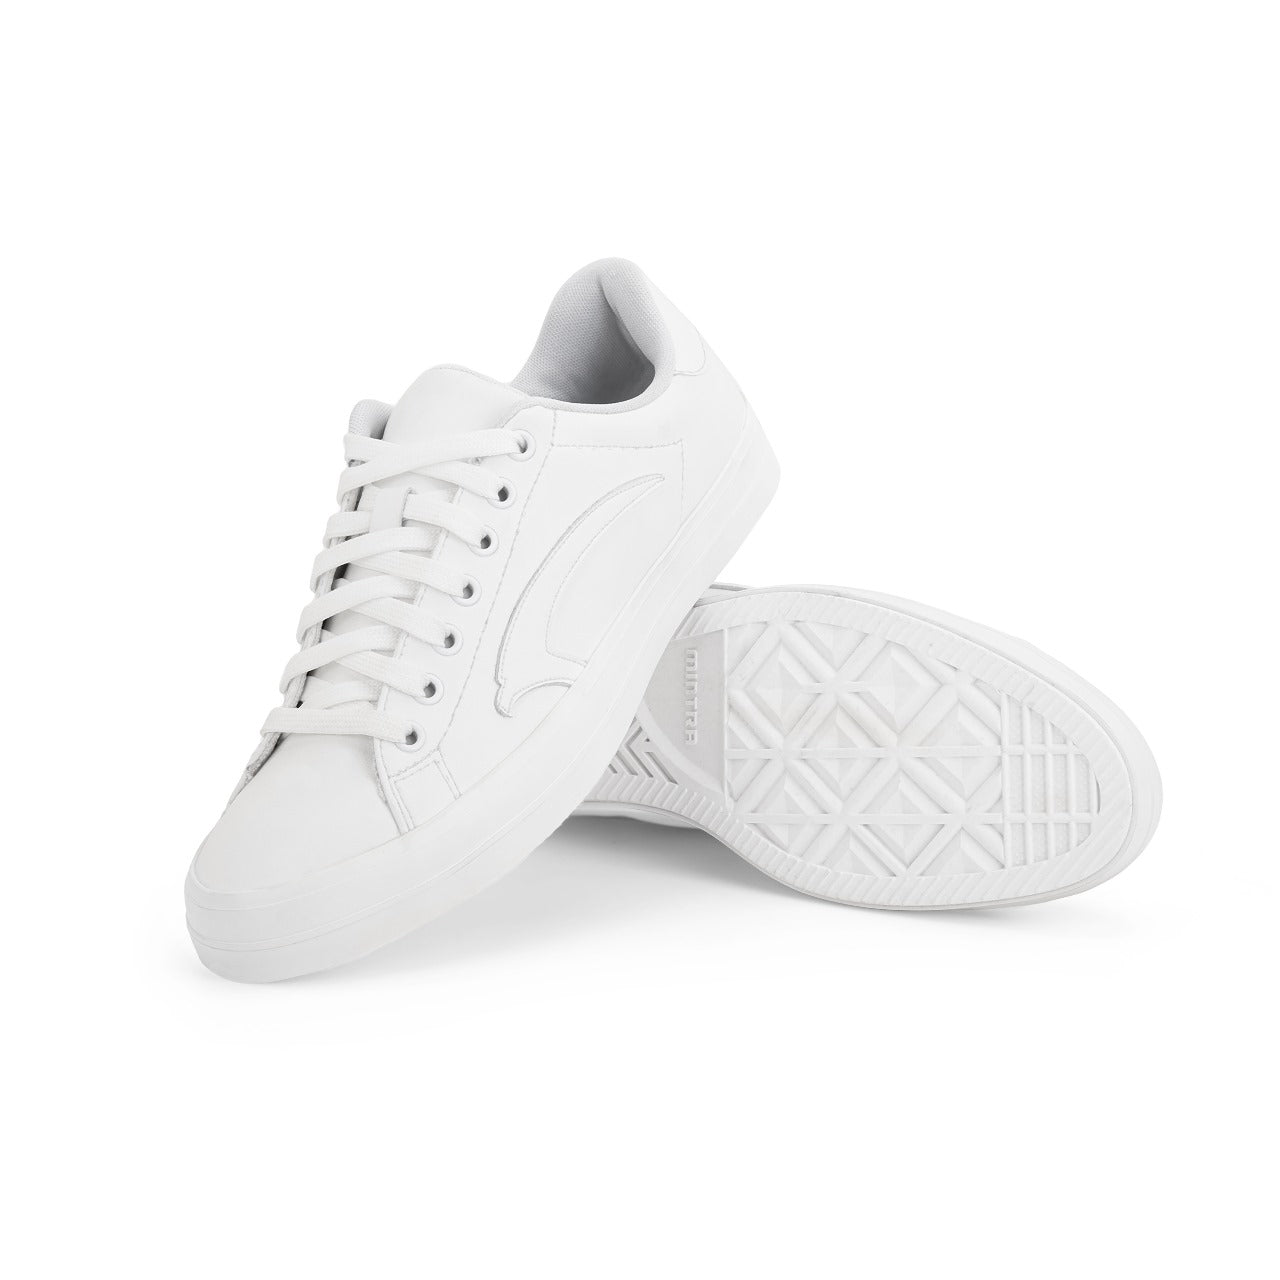 Mintra Urban Shoes For Women, White